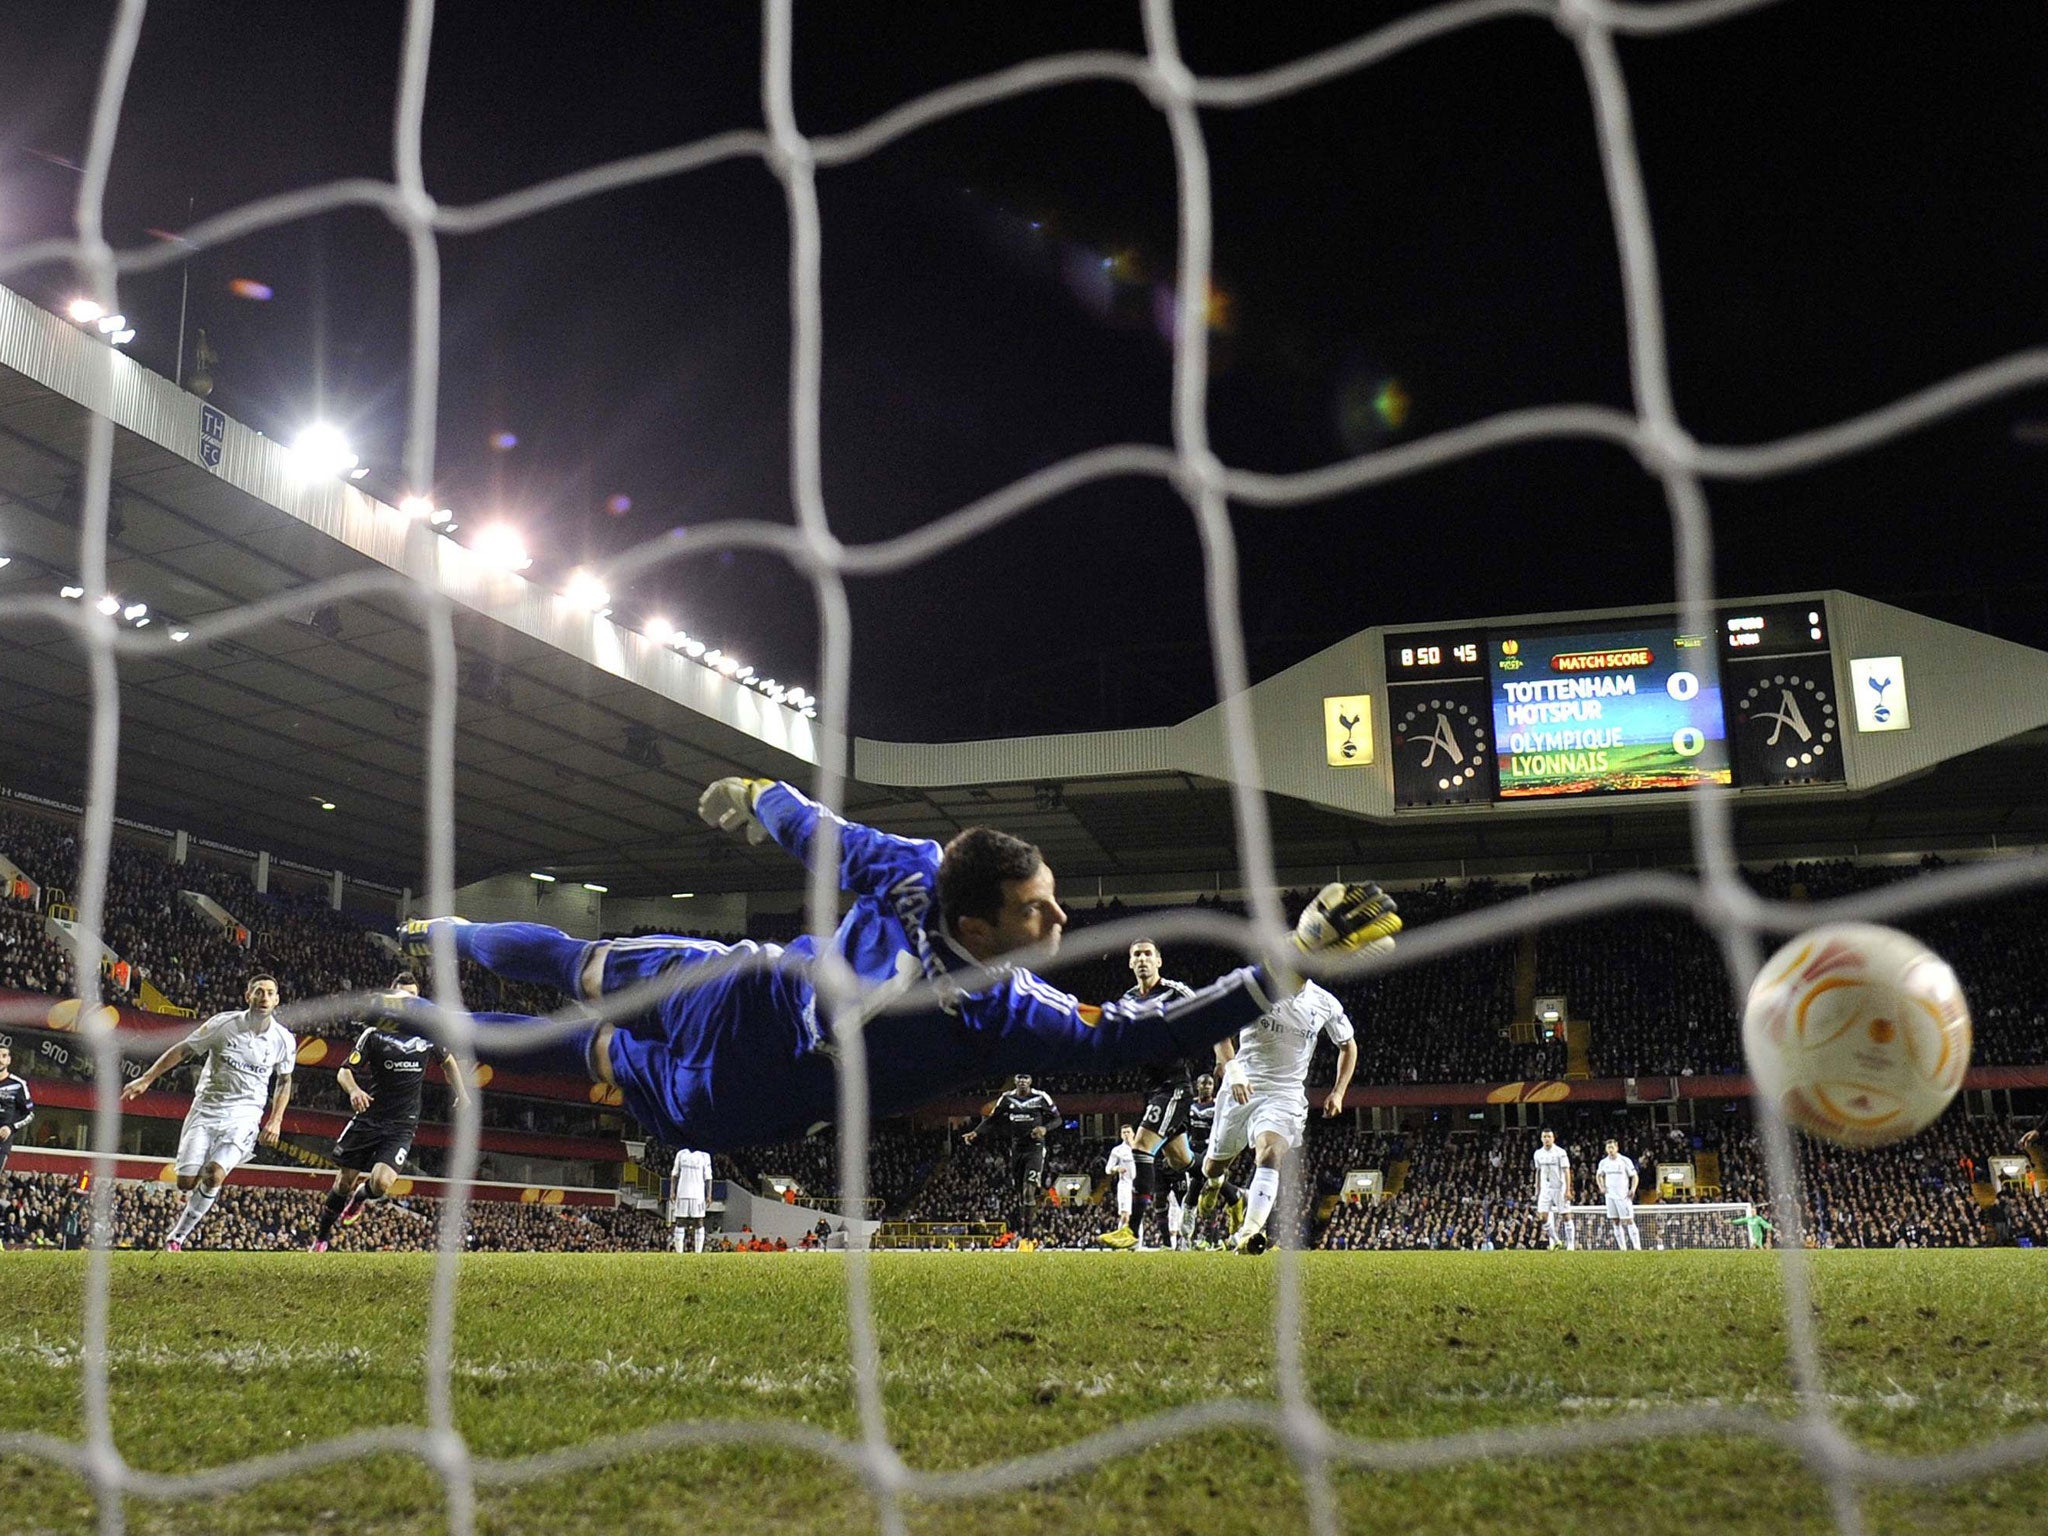 Gareth Bale’s free kick from 36 yards out gives Tottenham the lead last night